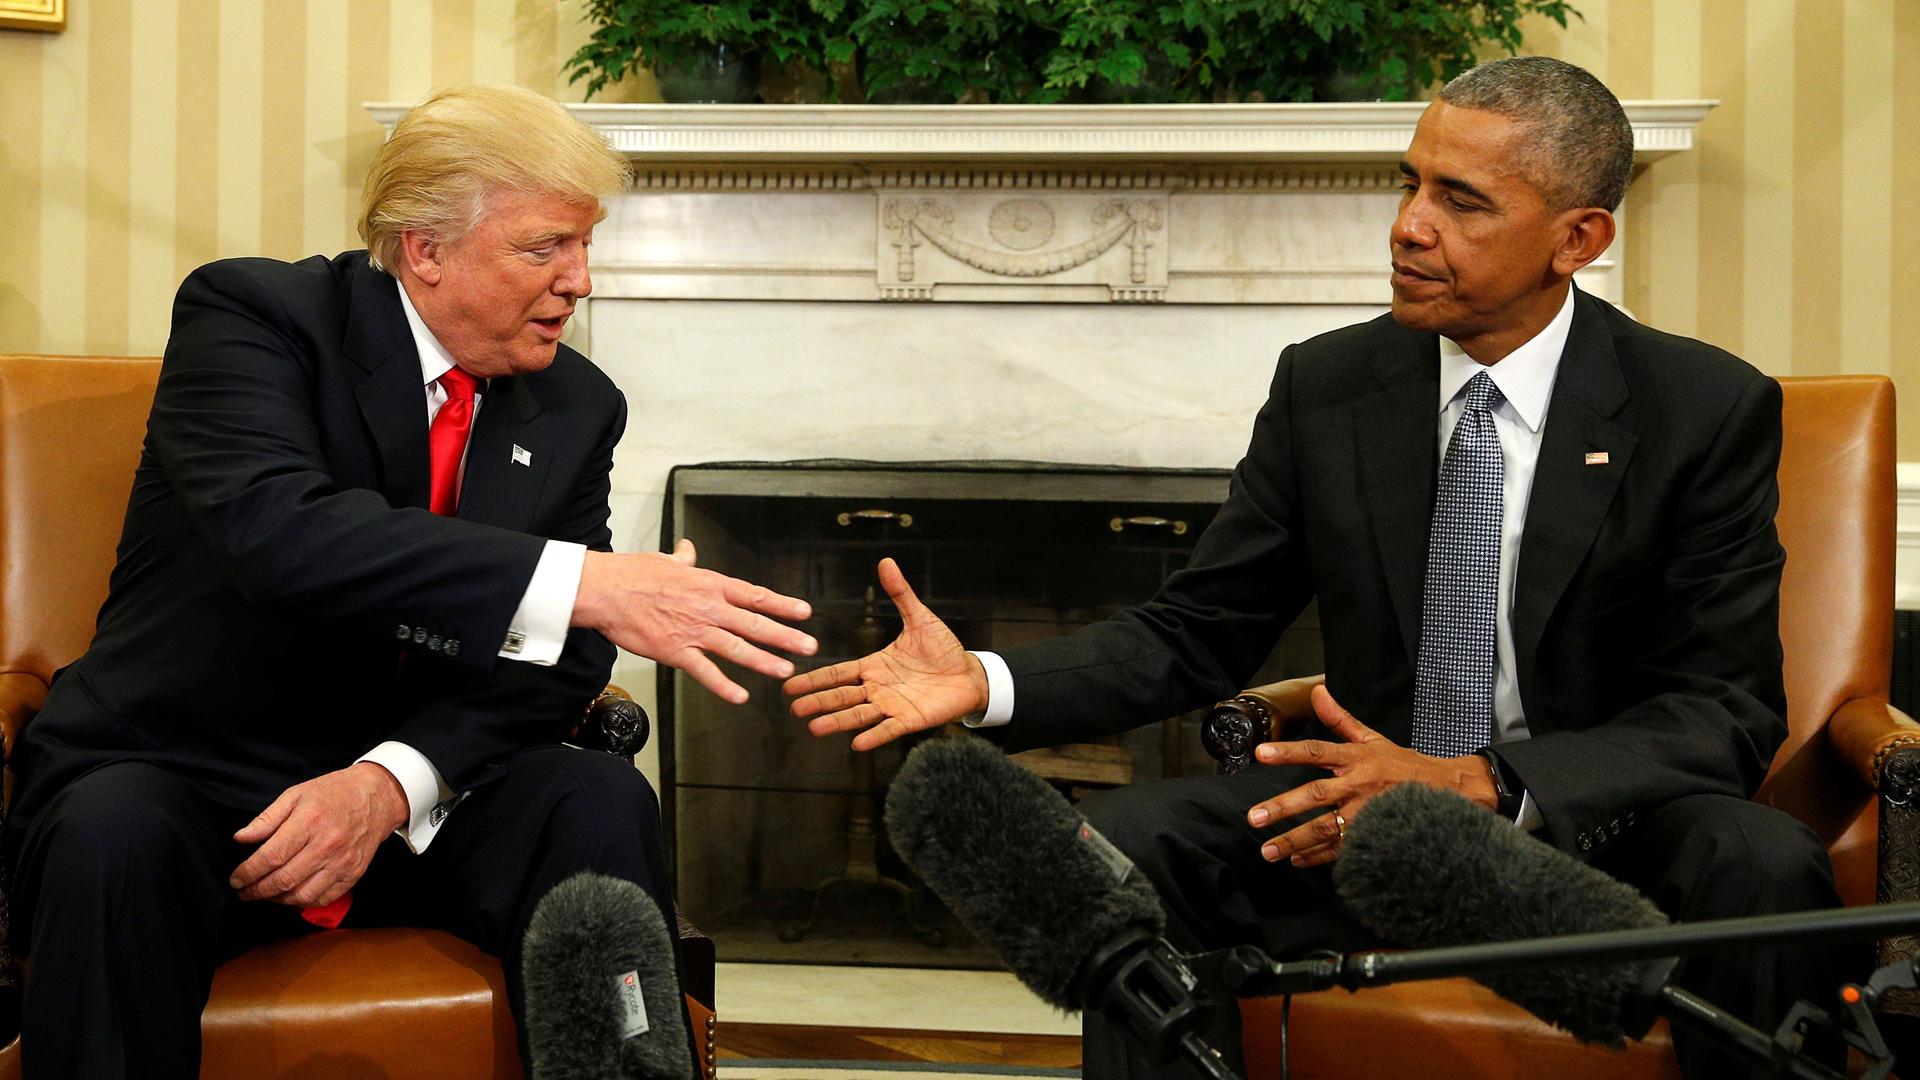 Obama meets with Trump at the White House in Washington